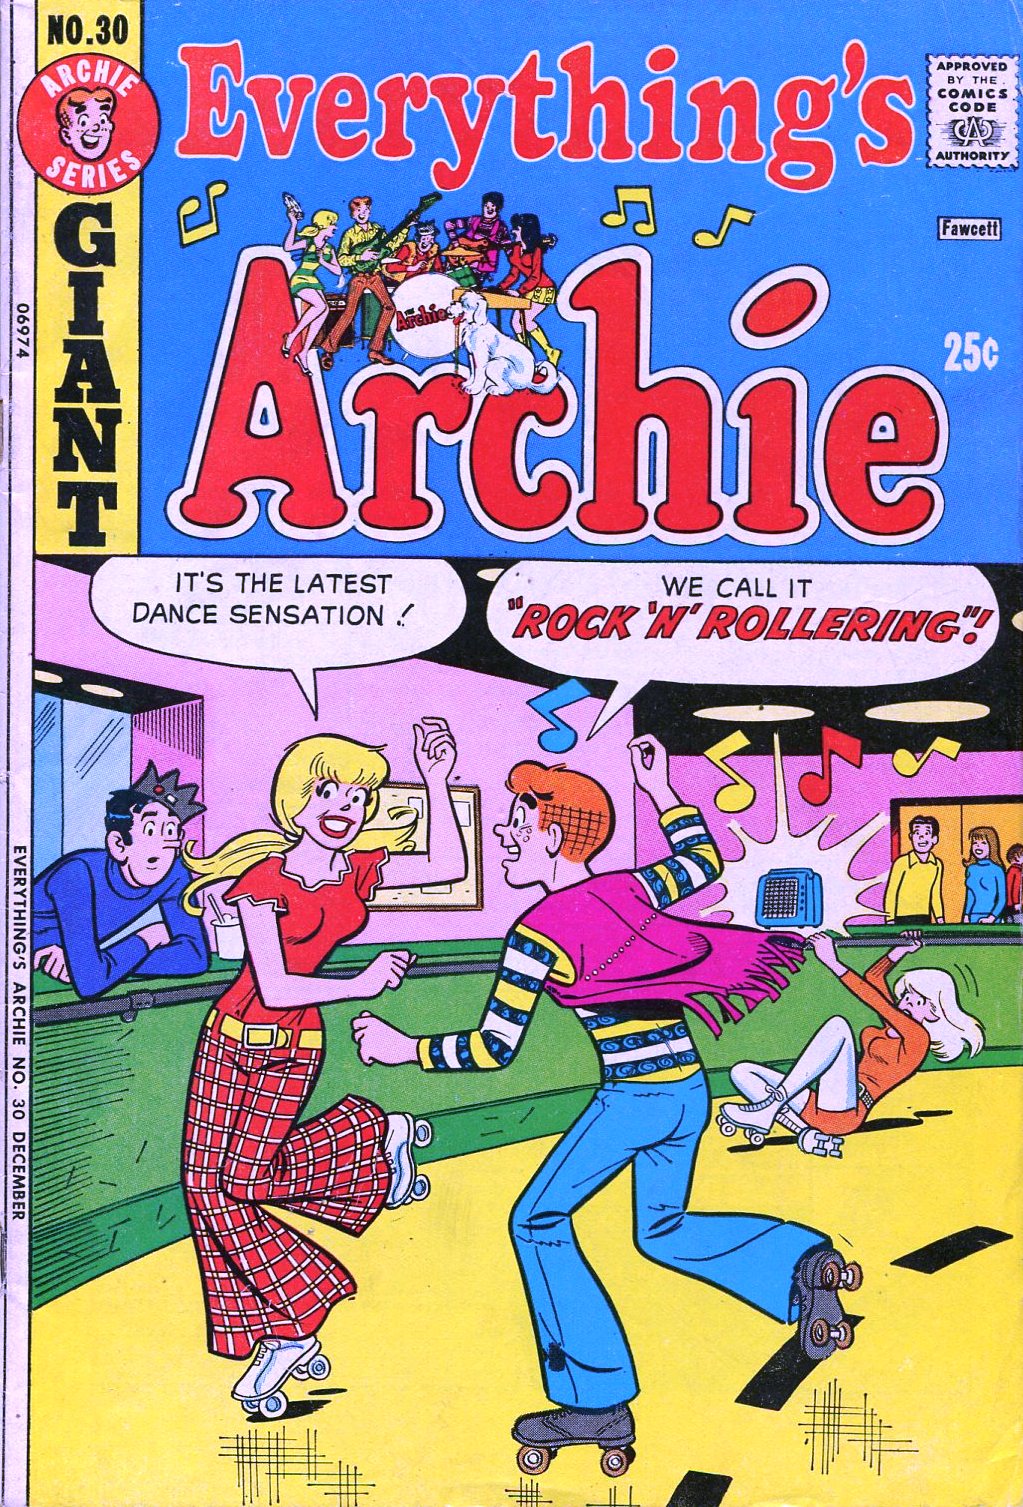 Read online Everything's Archie comic -  Issue #30 - 1